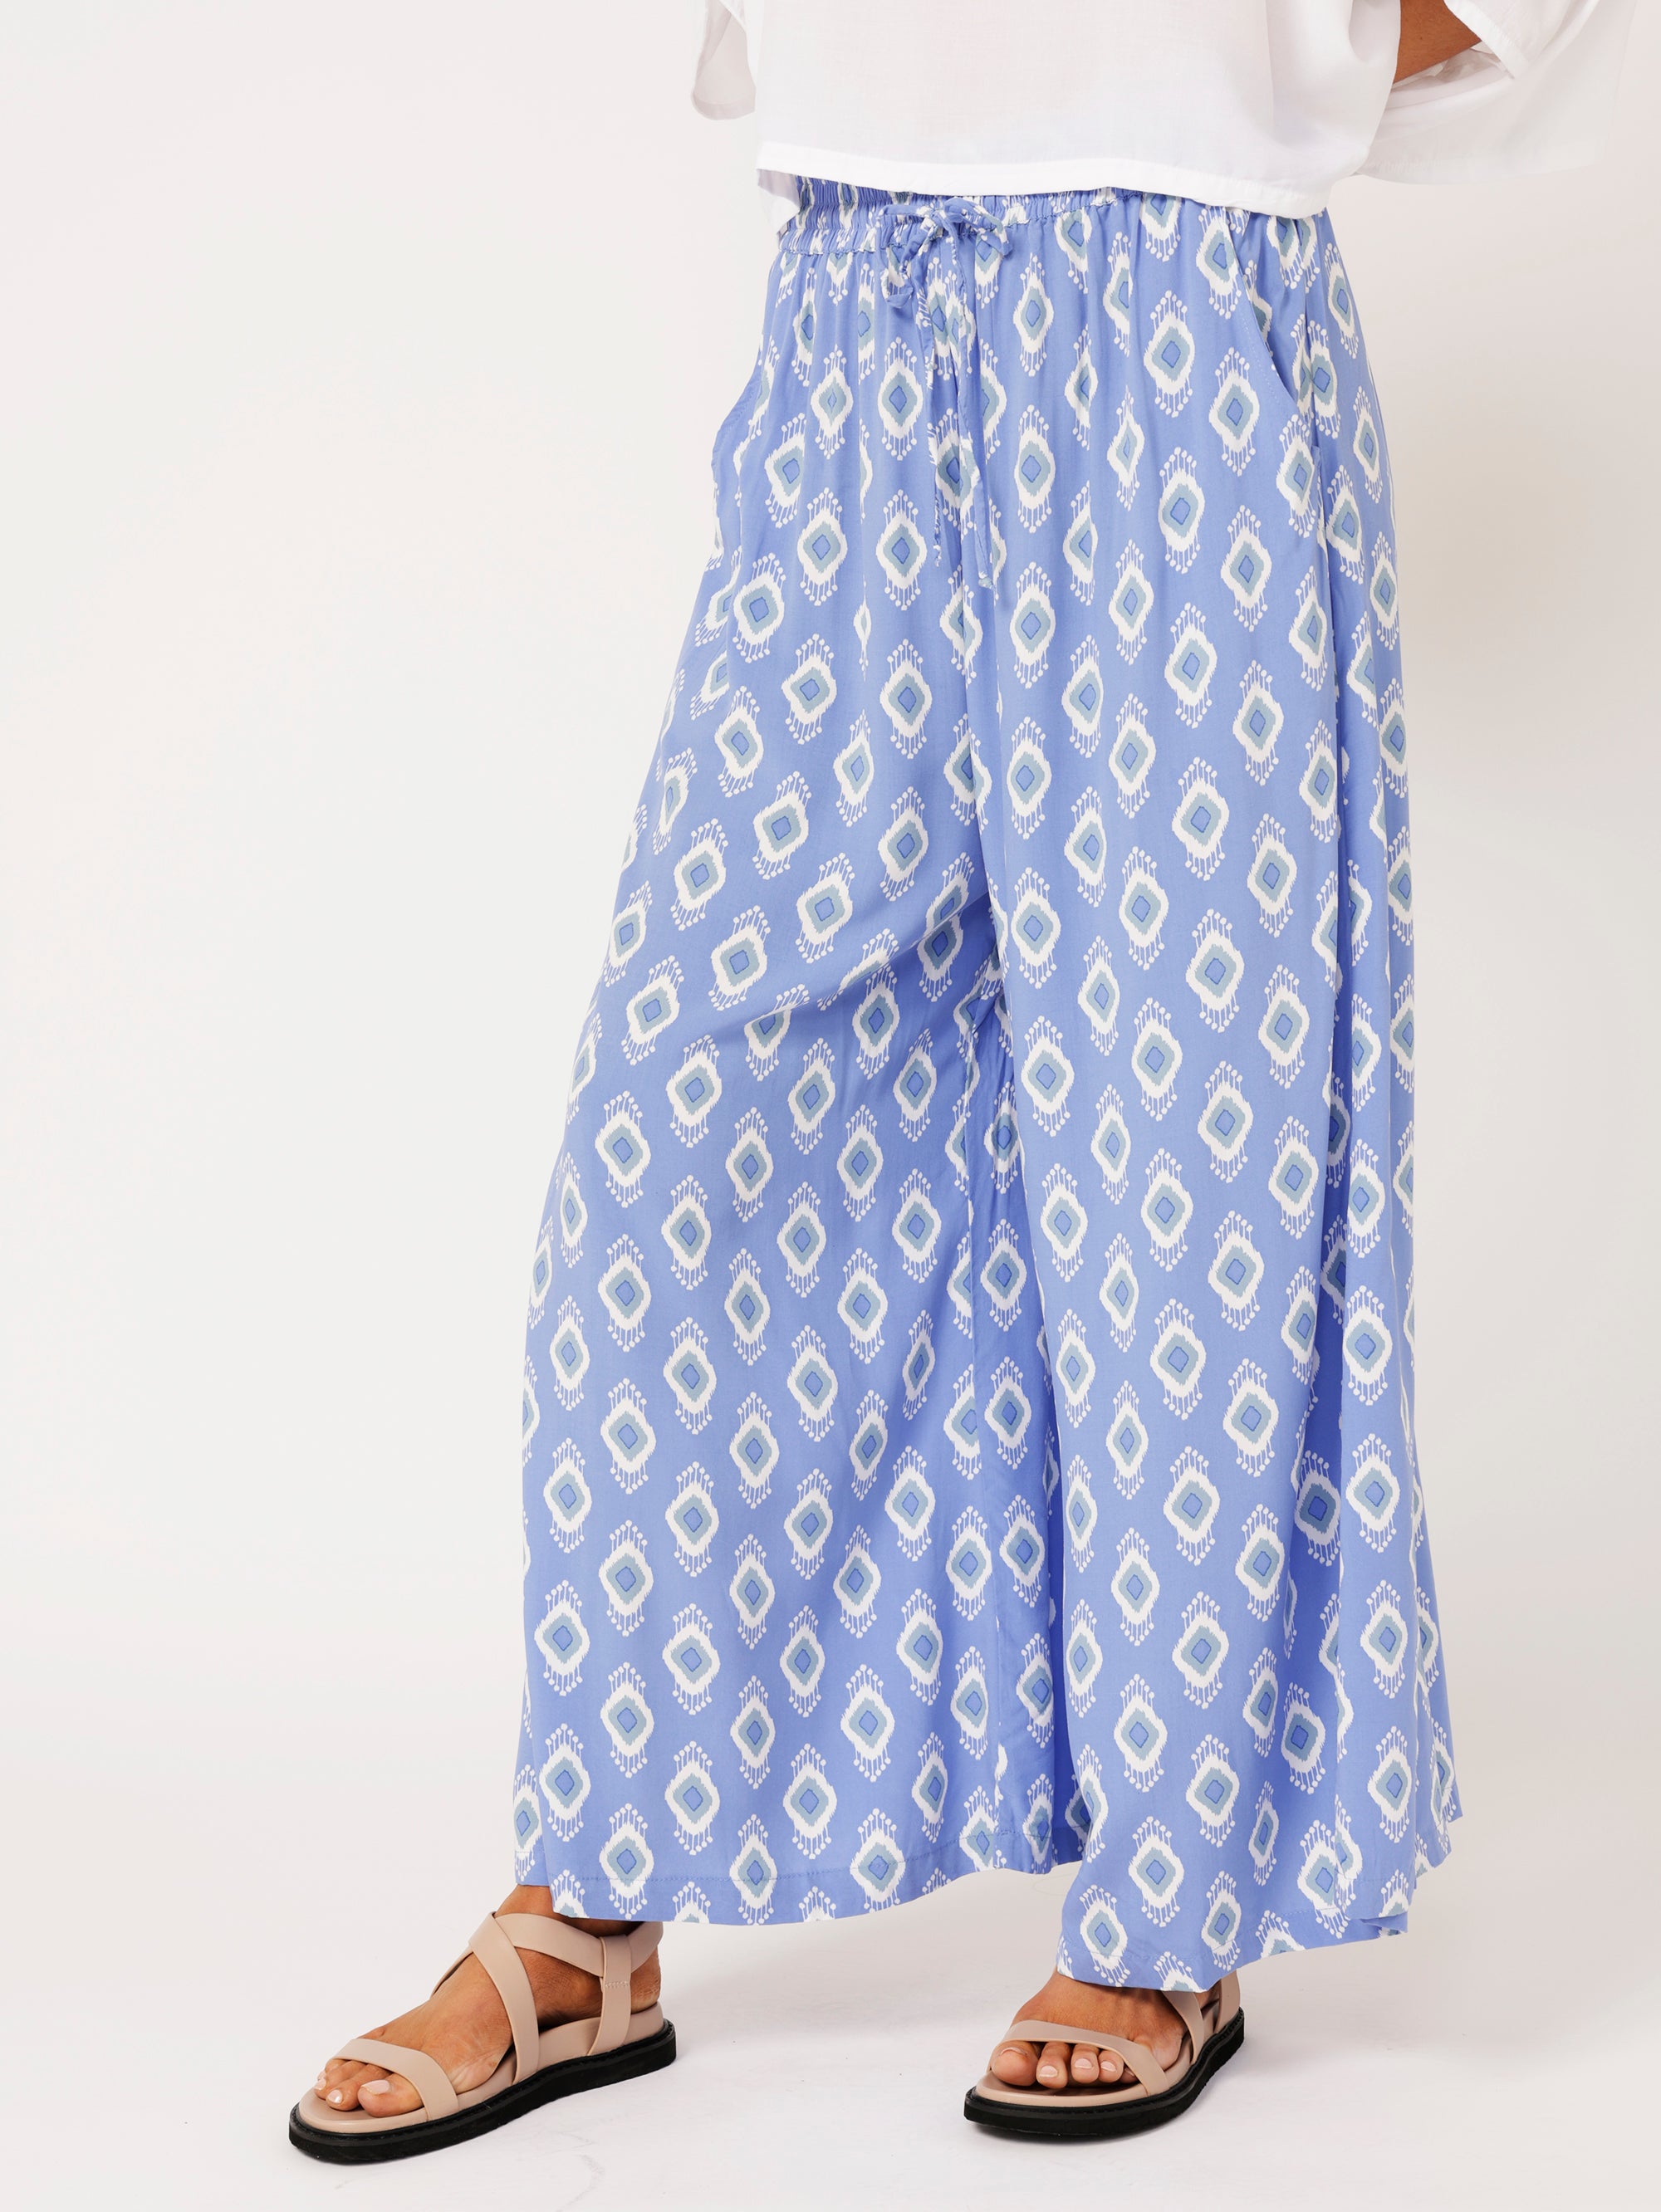 Palazzo Pant | All Eyes on You Blue - Saffron Road